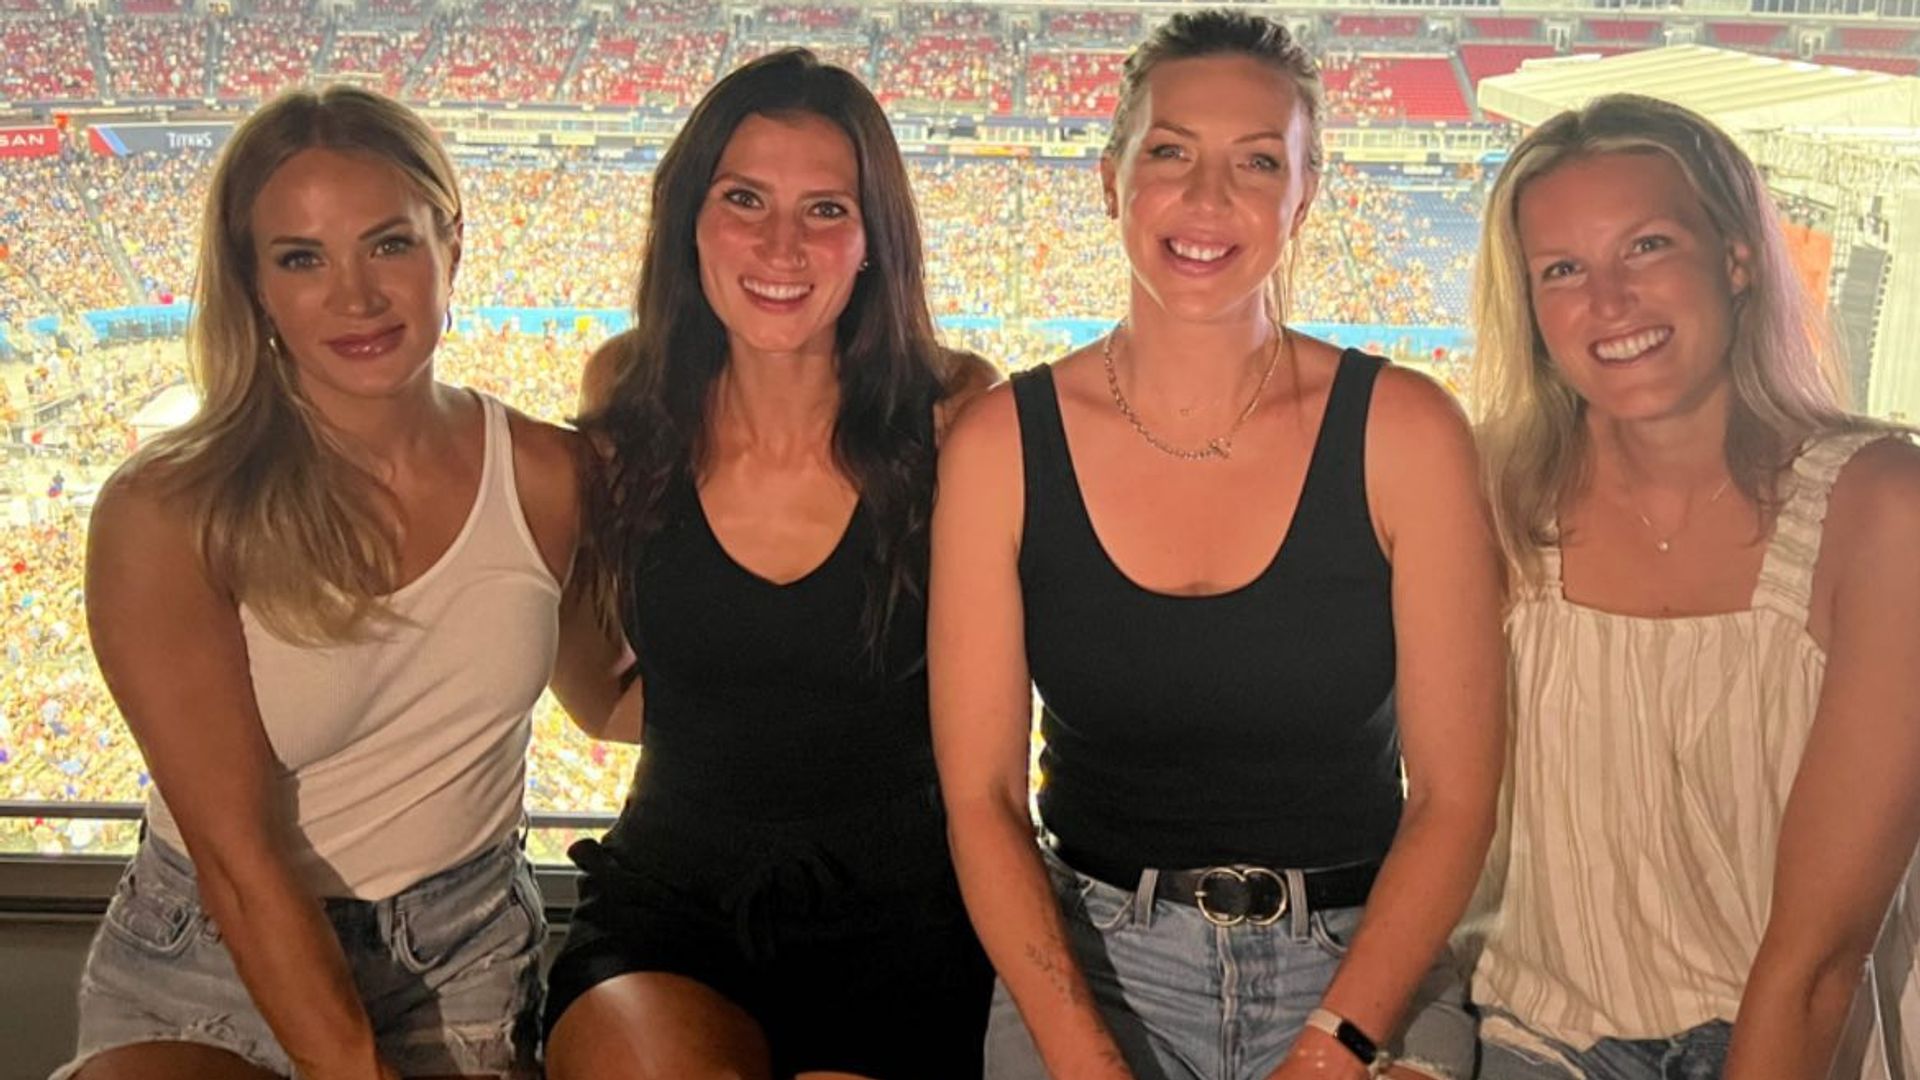 Carrie with her girlfriends at the George Strait show